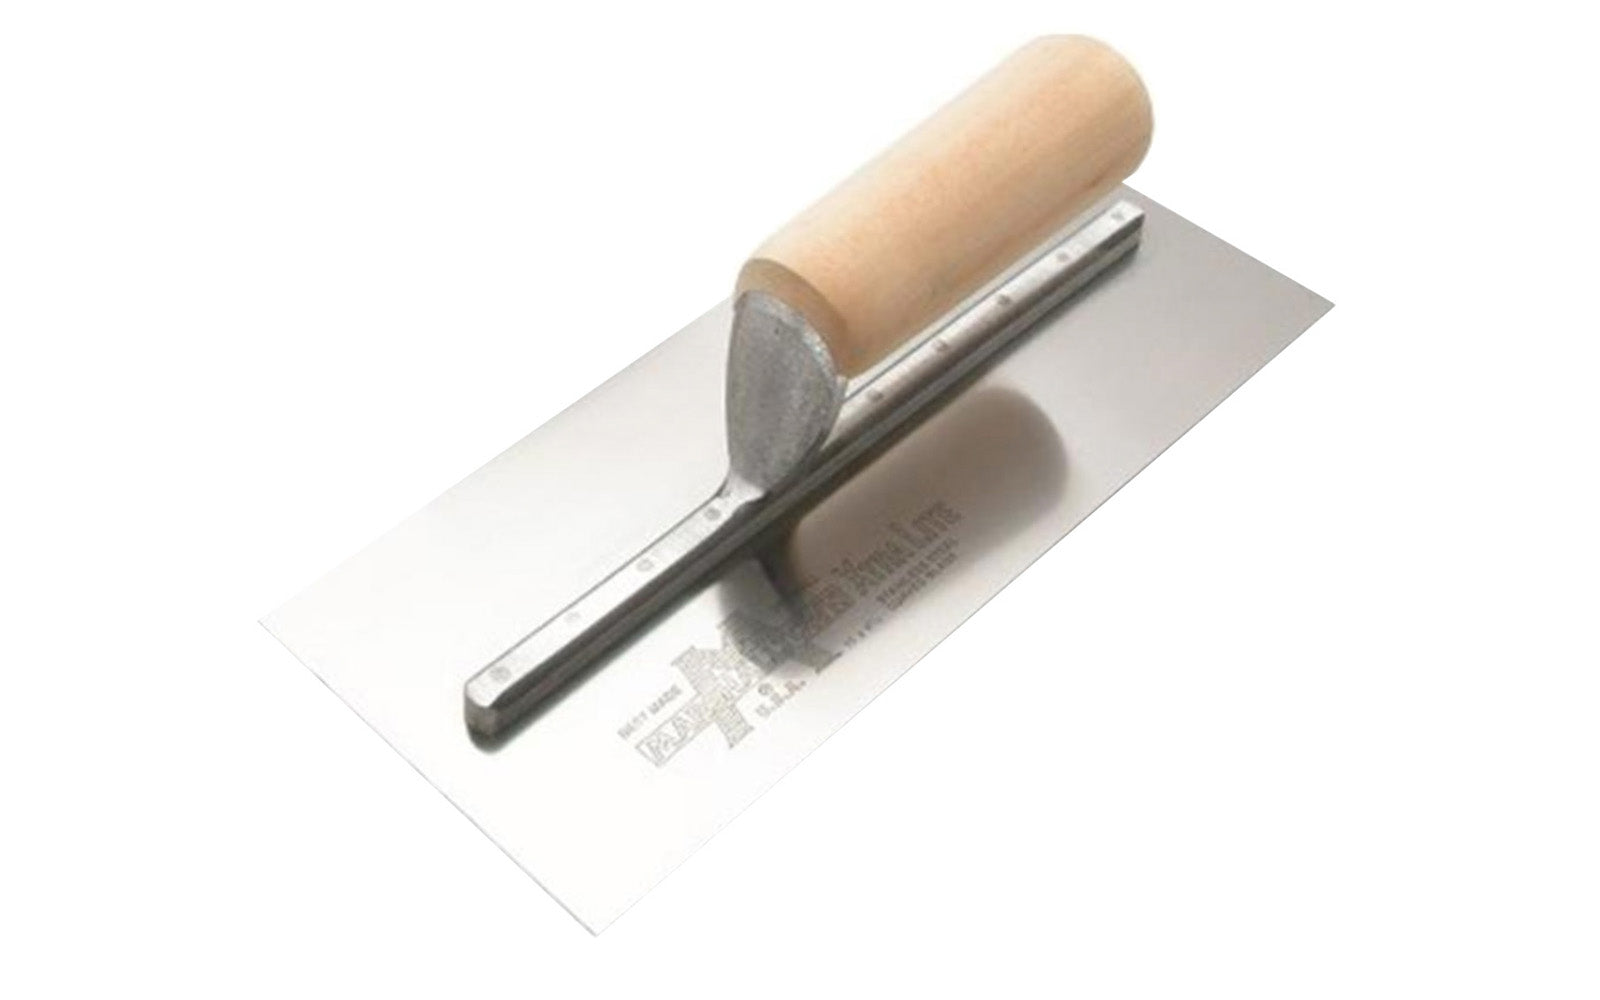 Marshalltown 14" x 4-1/2" Drywall Trowel with a slight concave bow that allows you to easily feather mud for perfectly smooth drywall joints and repair jobs. The flexible blade is tempered, ground, and polished for enhanced performance. Model 12A ~ 035965026147